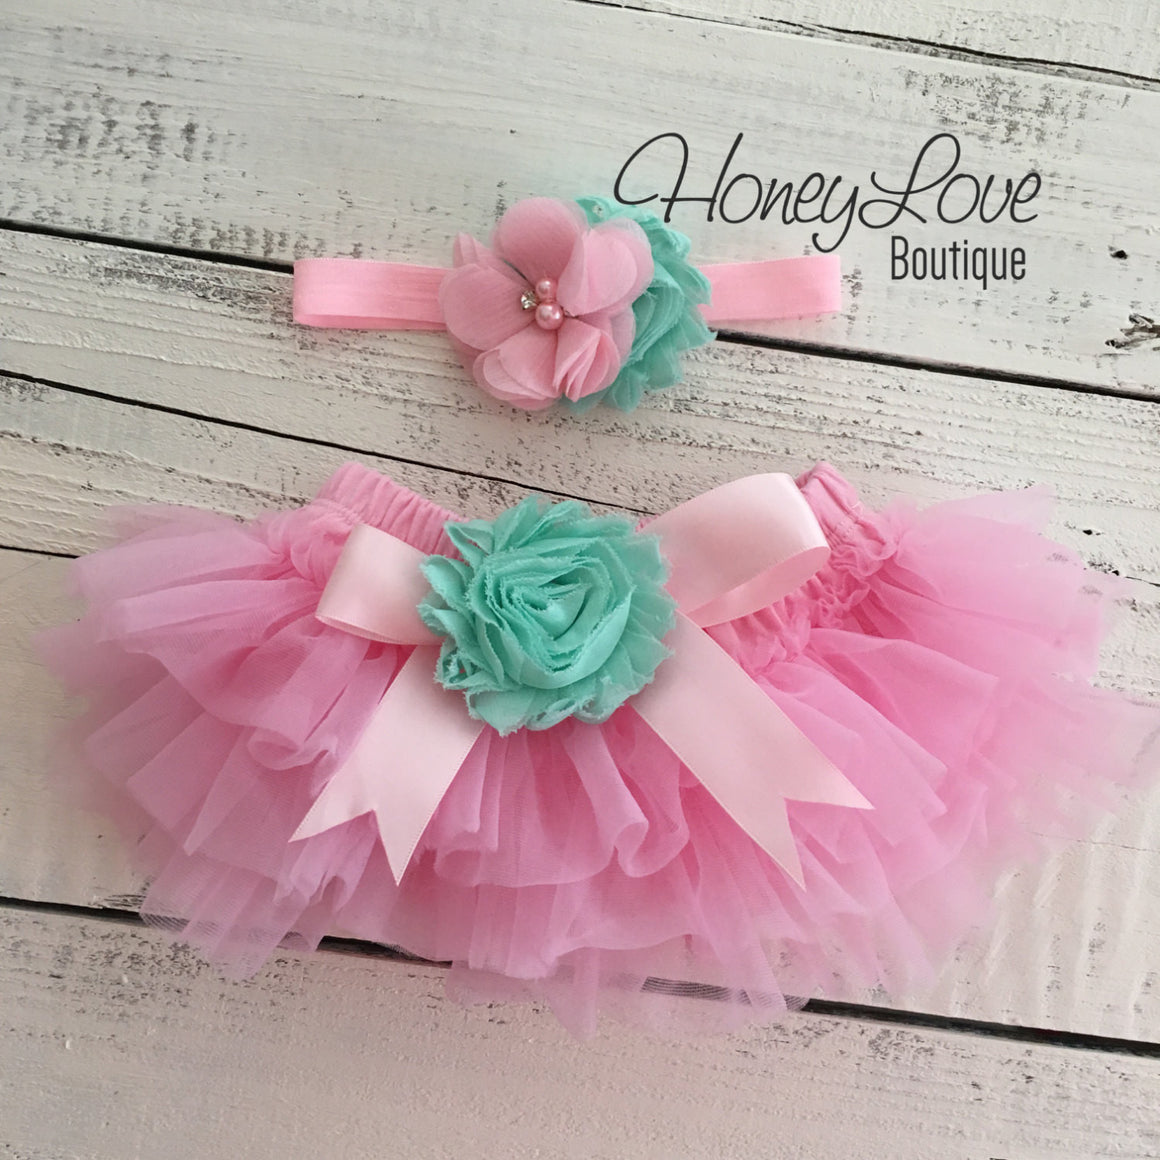 PERSONALIZED Name Outfit - Light Pink and Gold Glitter - Mint/Aqua flower embellished tutu skirt bloomers - HoneyLoveBoutique